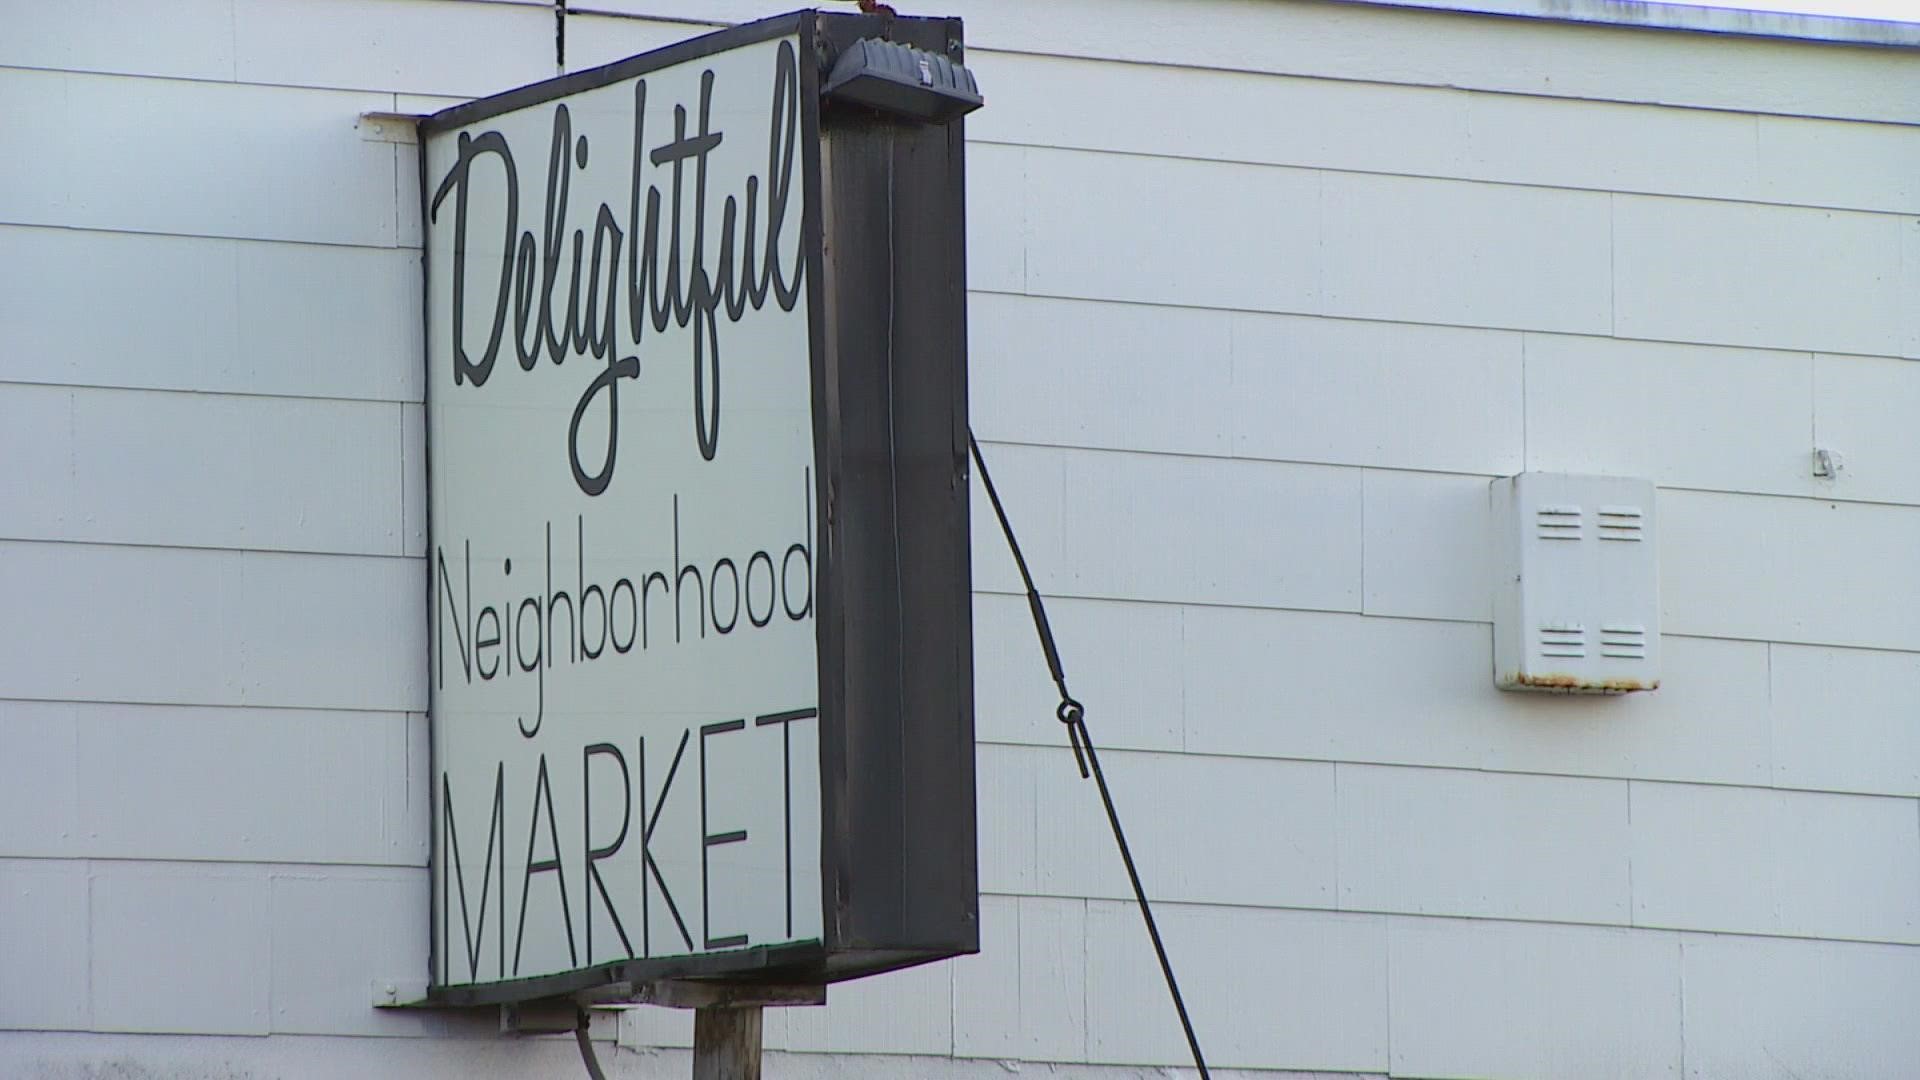 The Delightful Neighborhood Market is one of several businesses in the Tacoma area with boarded windows due to crime.